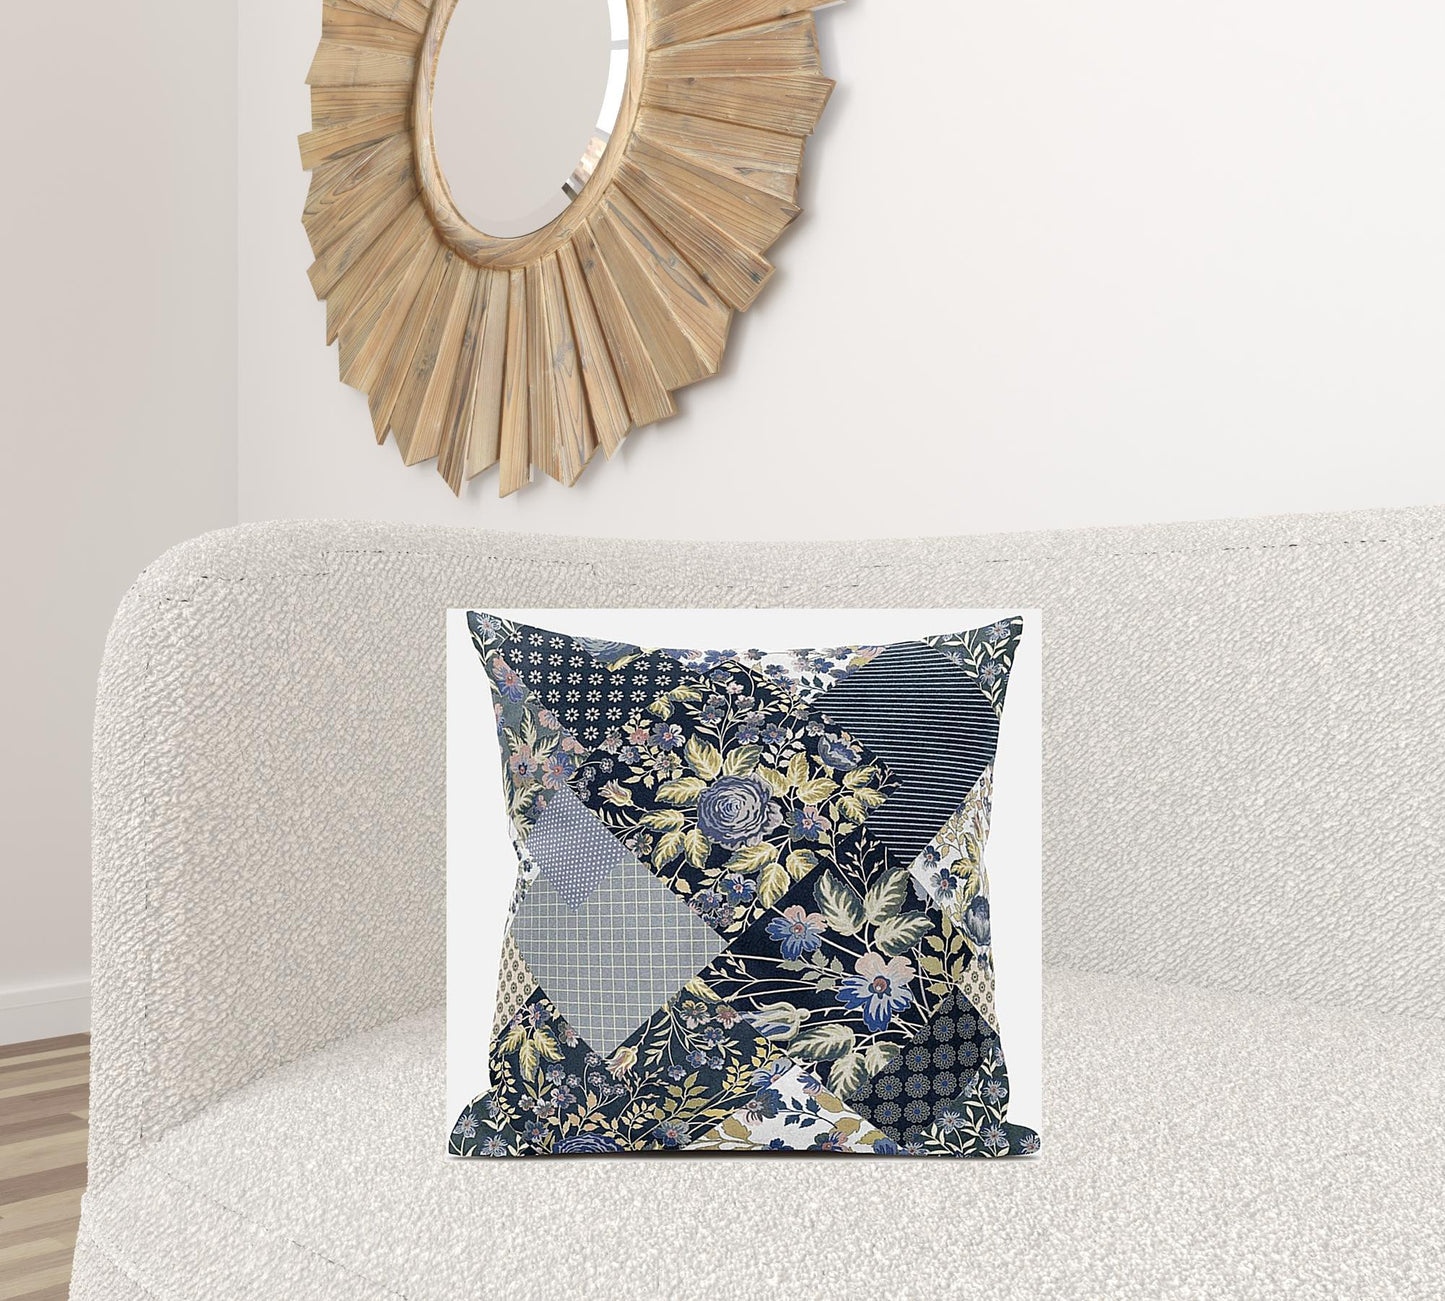 18" Black Yellow Floral Zippered Suede Throw Pillow